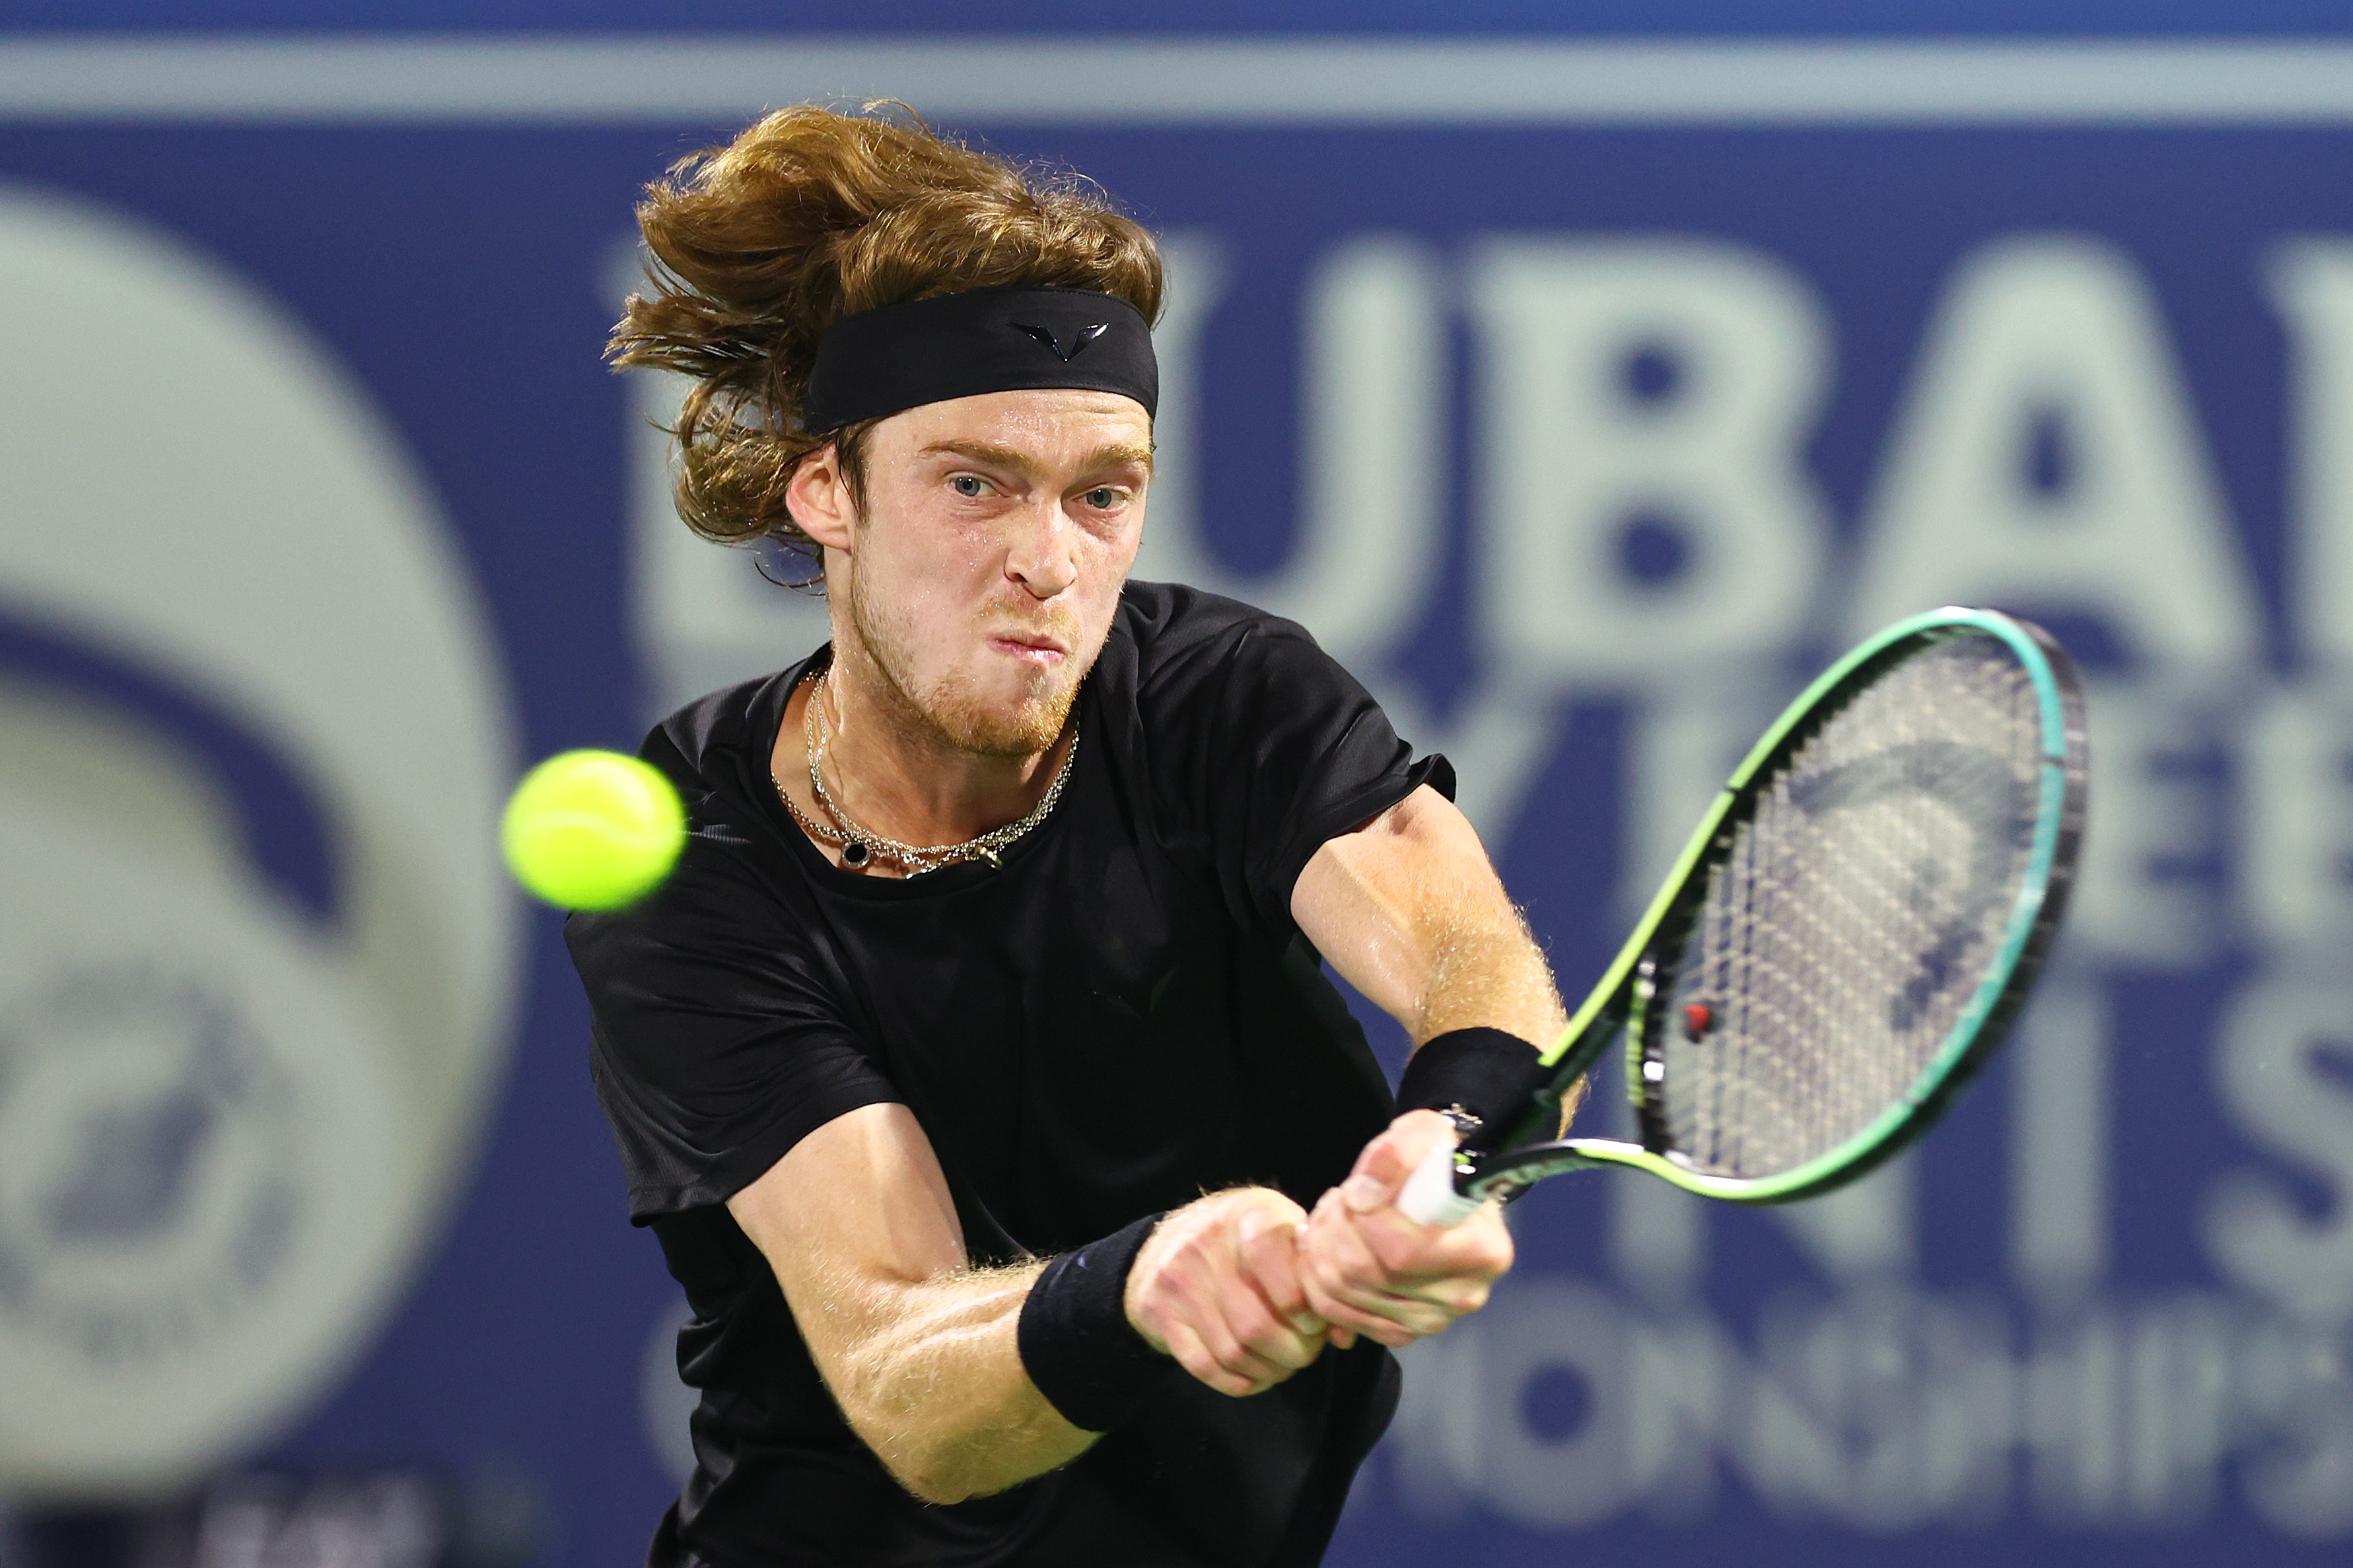 DUBAI, UAE, 4th March 2023. 2022 champion Andrey Rublev in action during  the men's singles final of the Dubai Duty Free Tennis Open Championships.  3rd seed Daniil Medvedev defeated Rublev 6-2, 6-2